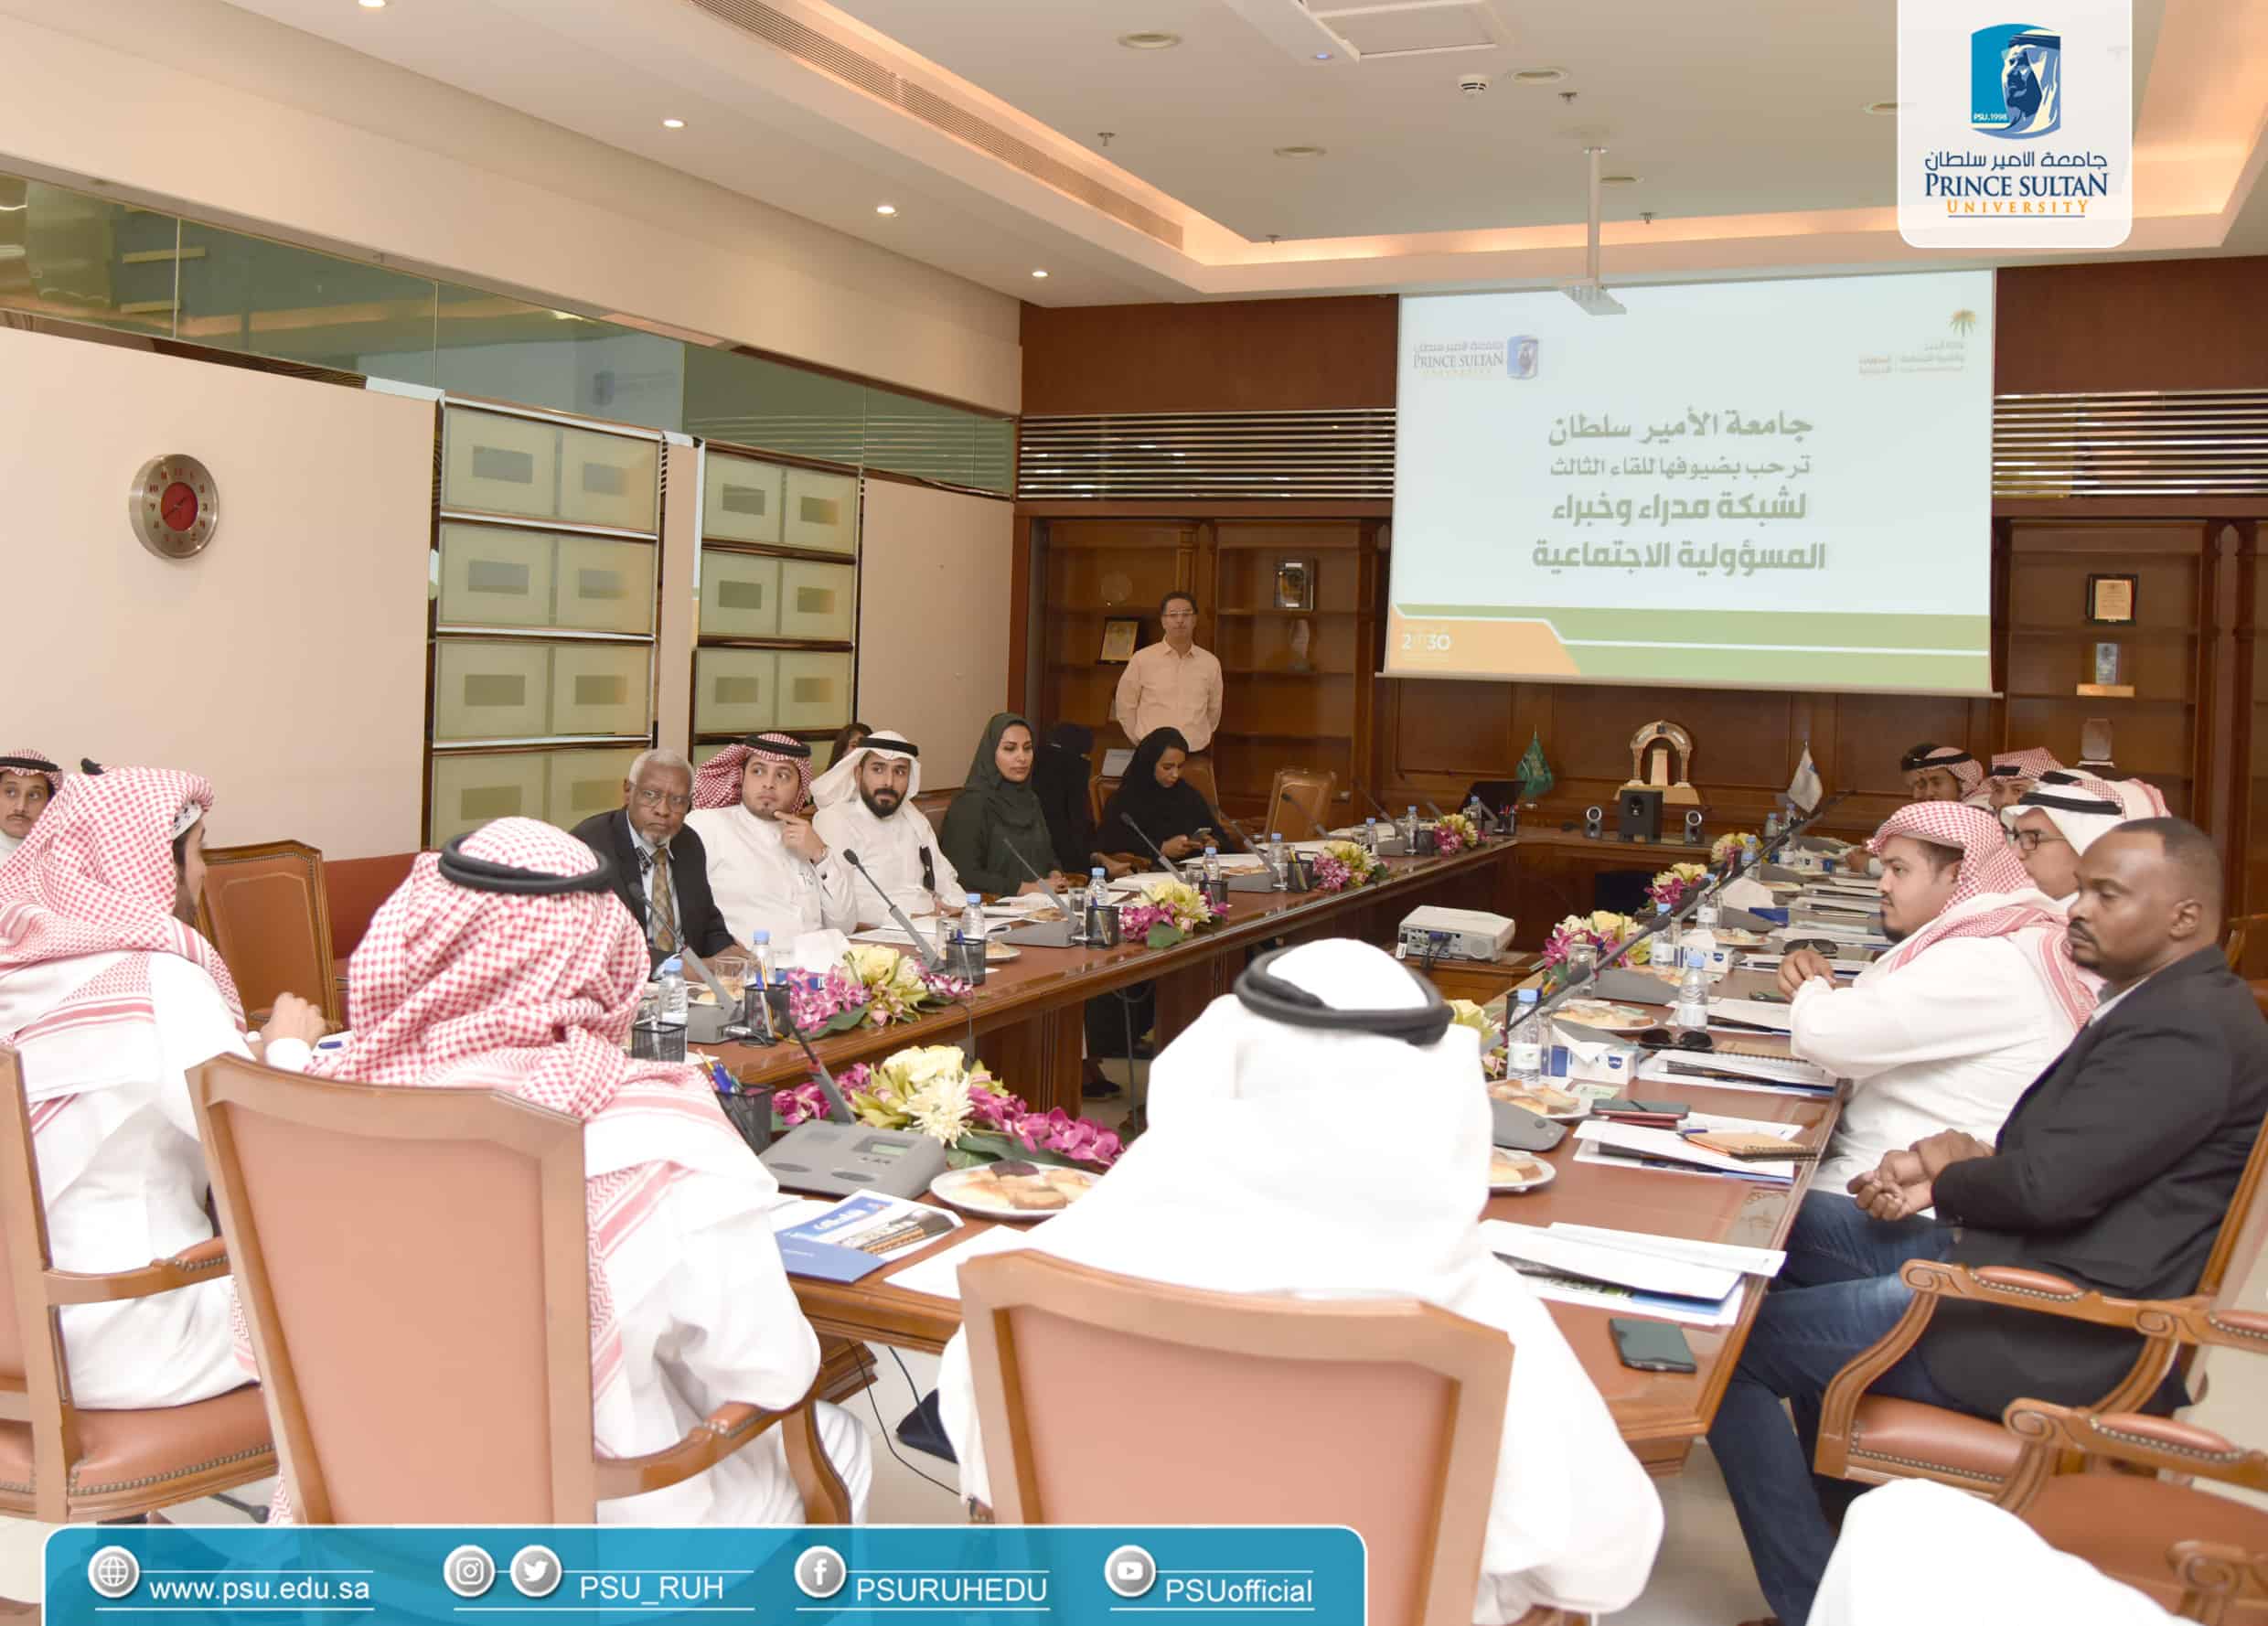 Prince Sultan University Hosts the Third Meeting for the Social Responsibility Managers and Experts Network